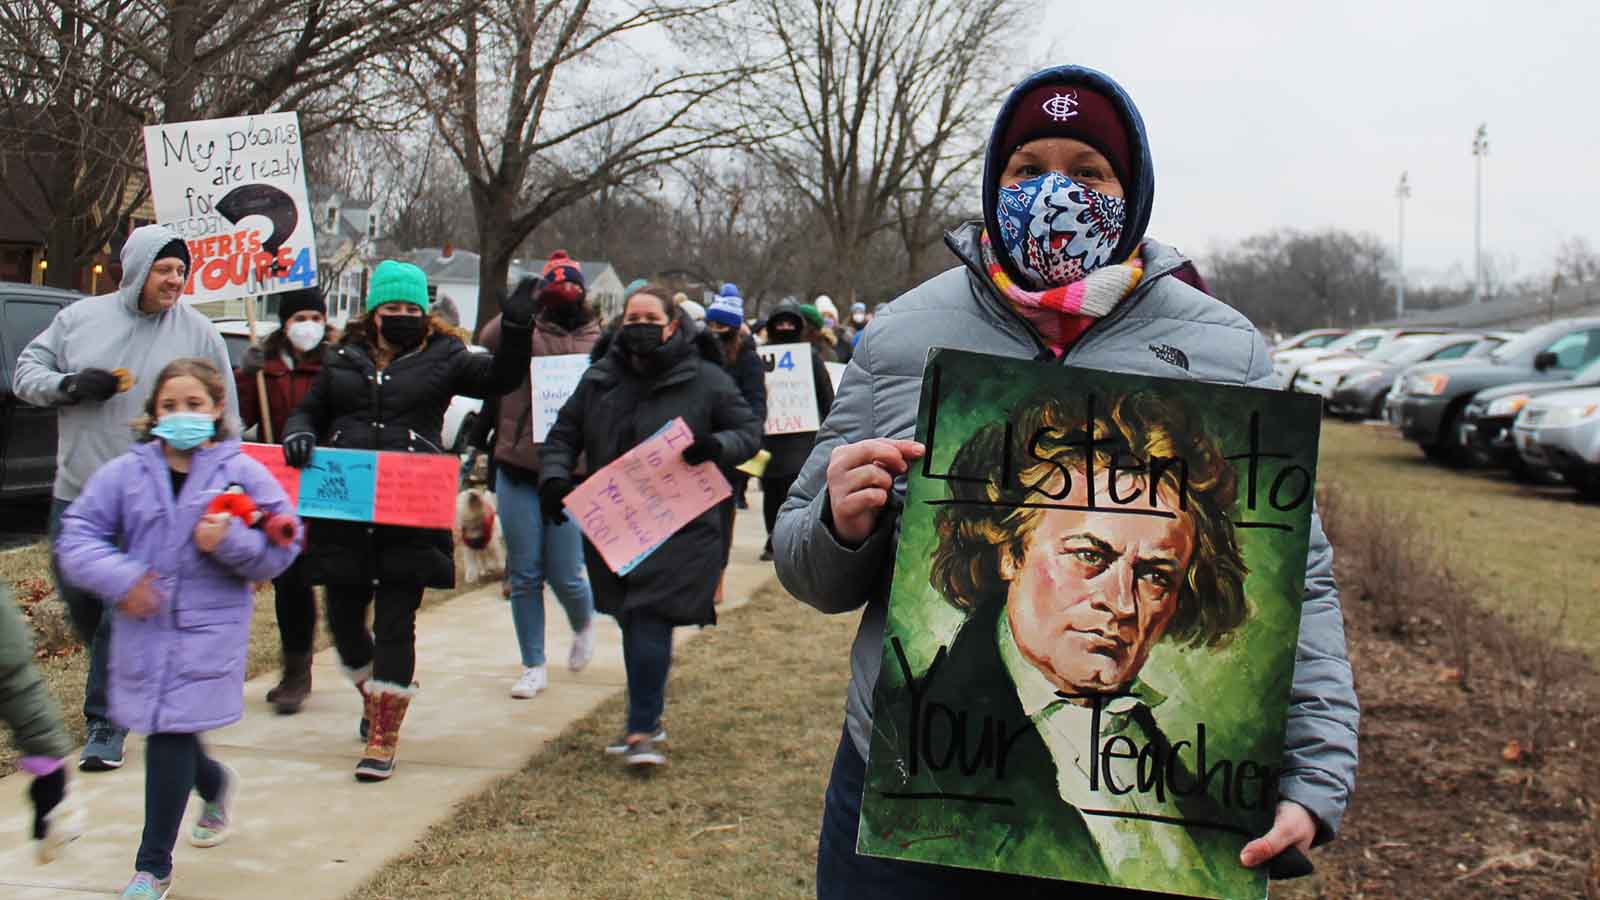 A woman with a face mask holds a sign that says, "Listen to your teacher."